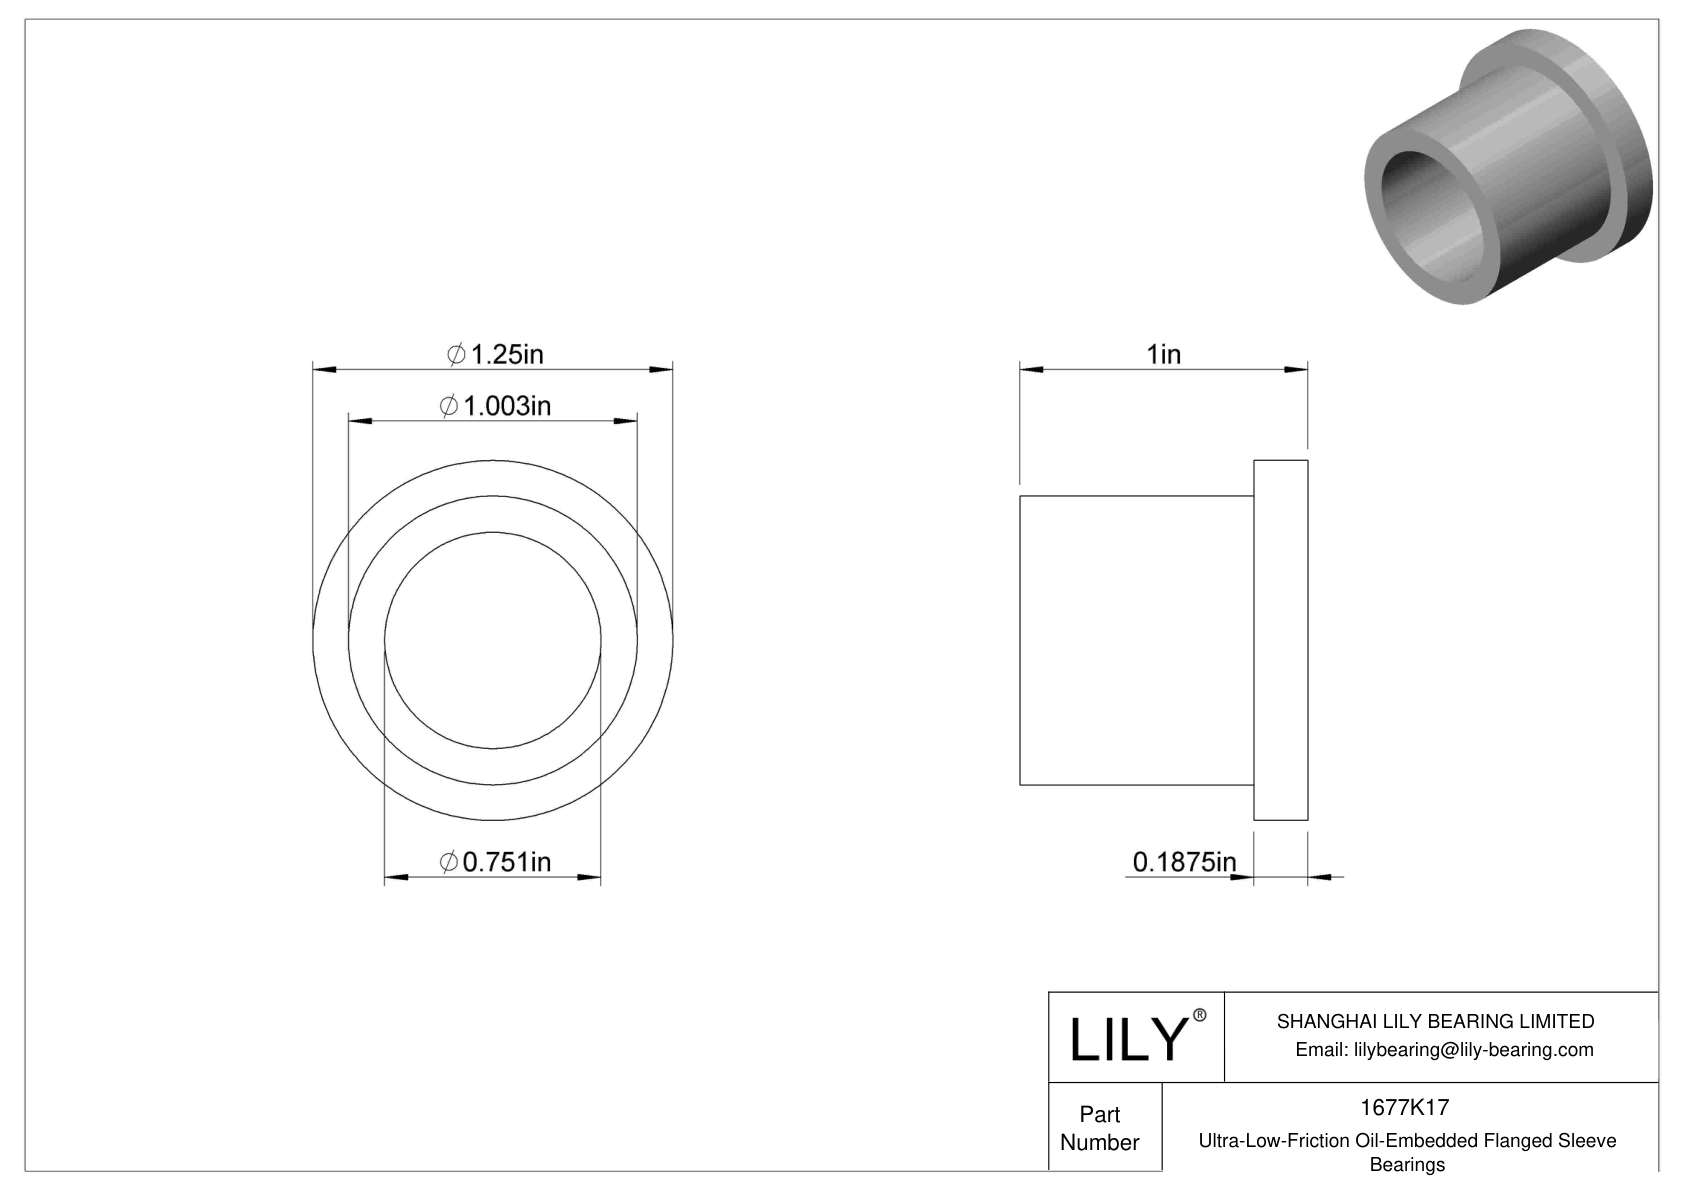 BGHHKBH Ultra-Low-Friction Oil-Embedded Flanged Sleeve Bearings cad drawing